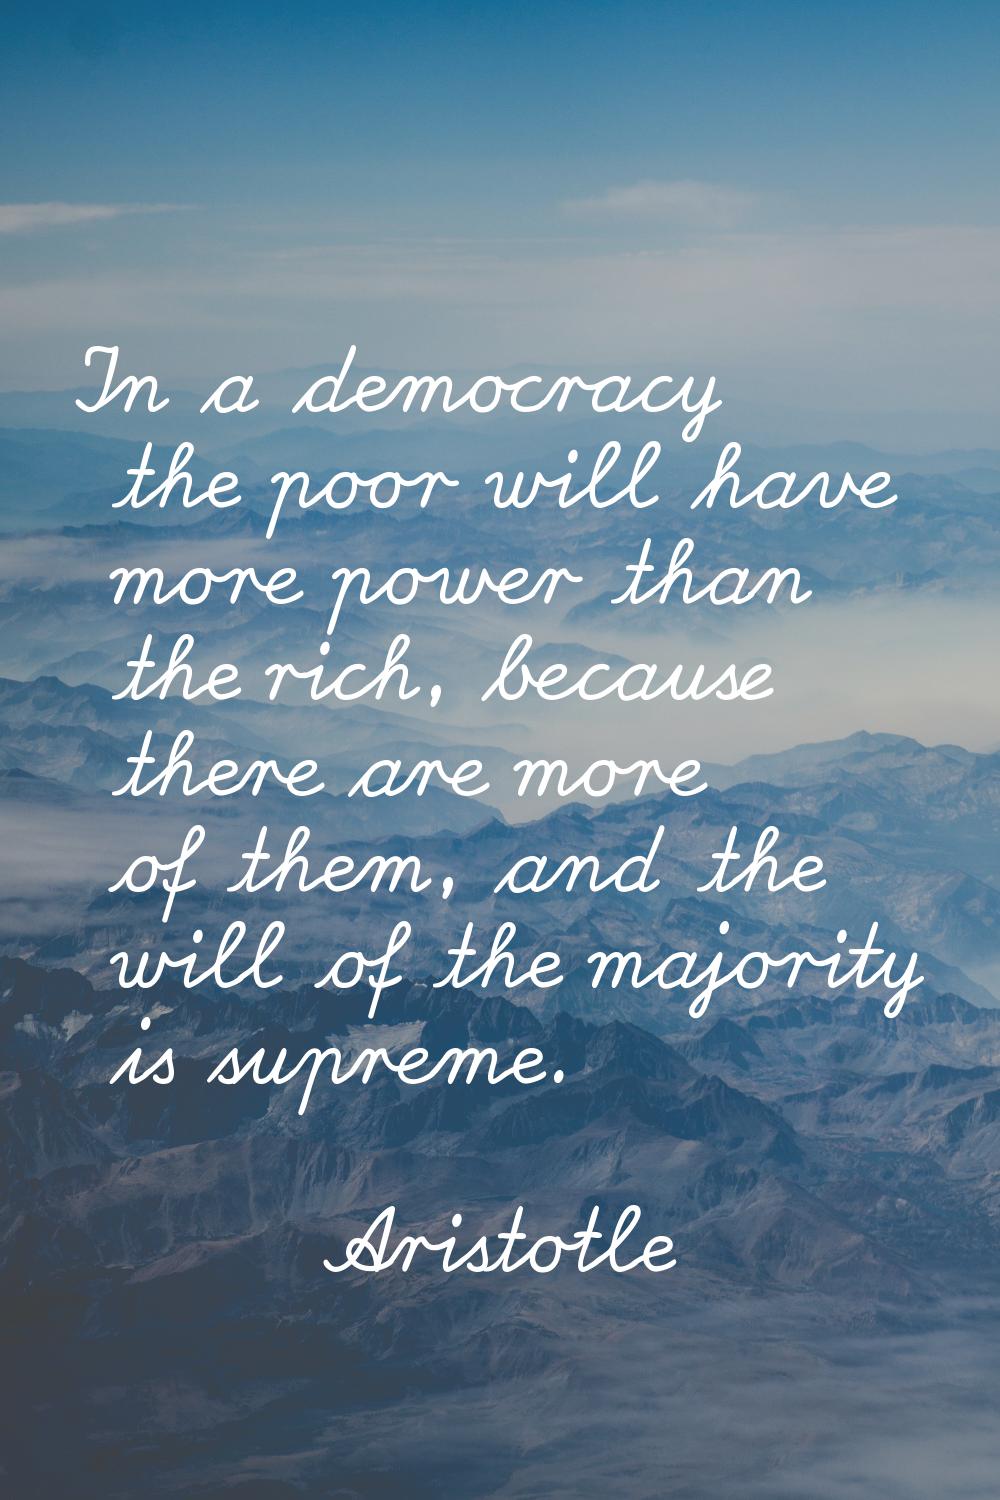 In a democracy the poor will have more power than the rich, because there are more of them, and the